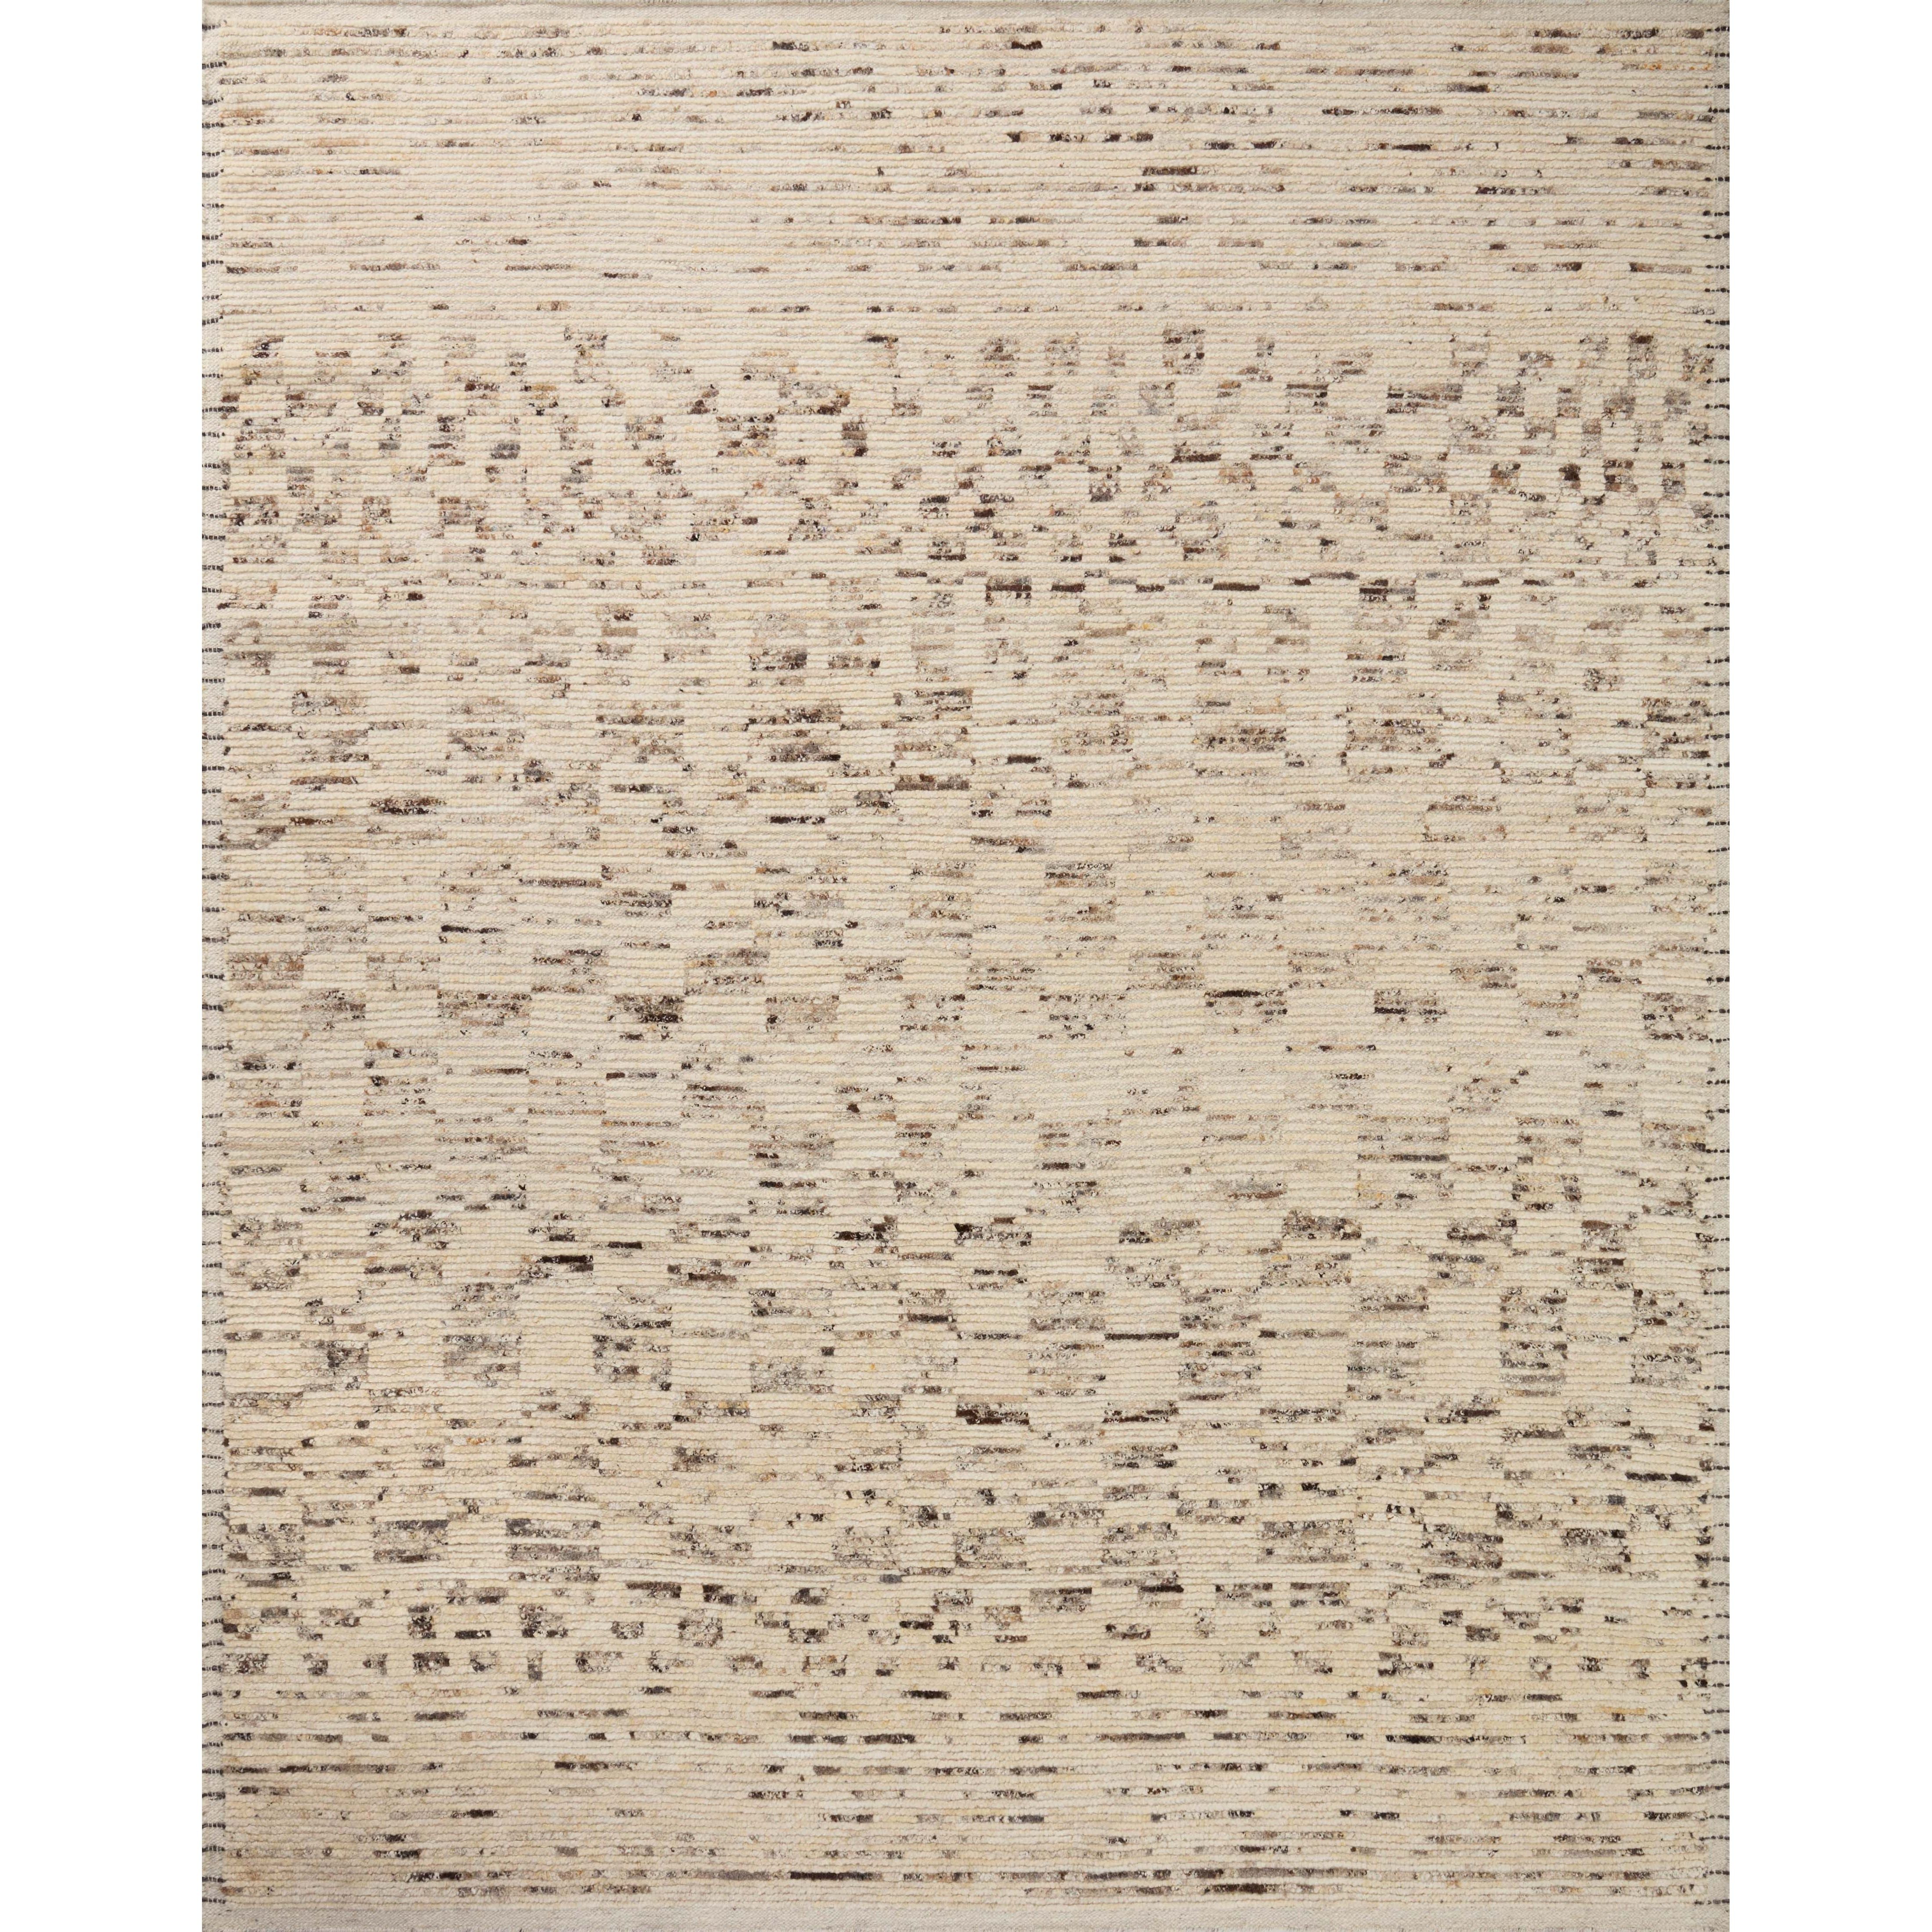 Amber Lewis x Loloi Briyana Natural / Granite Rug combines the incredible ribbed texture of Moroccan rugs with clean, contemporary design, thanks to Lewis’s careful eye for details.  Amethyst Home provides interior design services, furniture, rugs, and lighting in the Calabasas metro area.